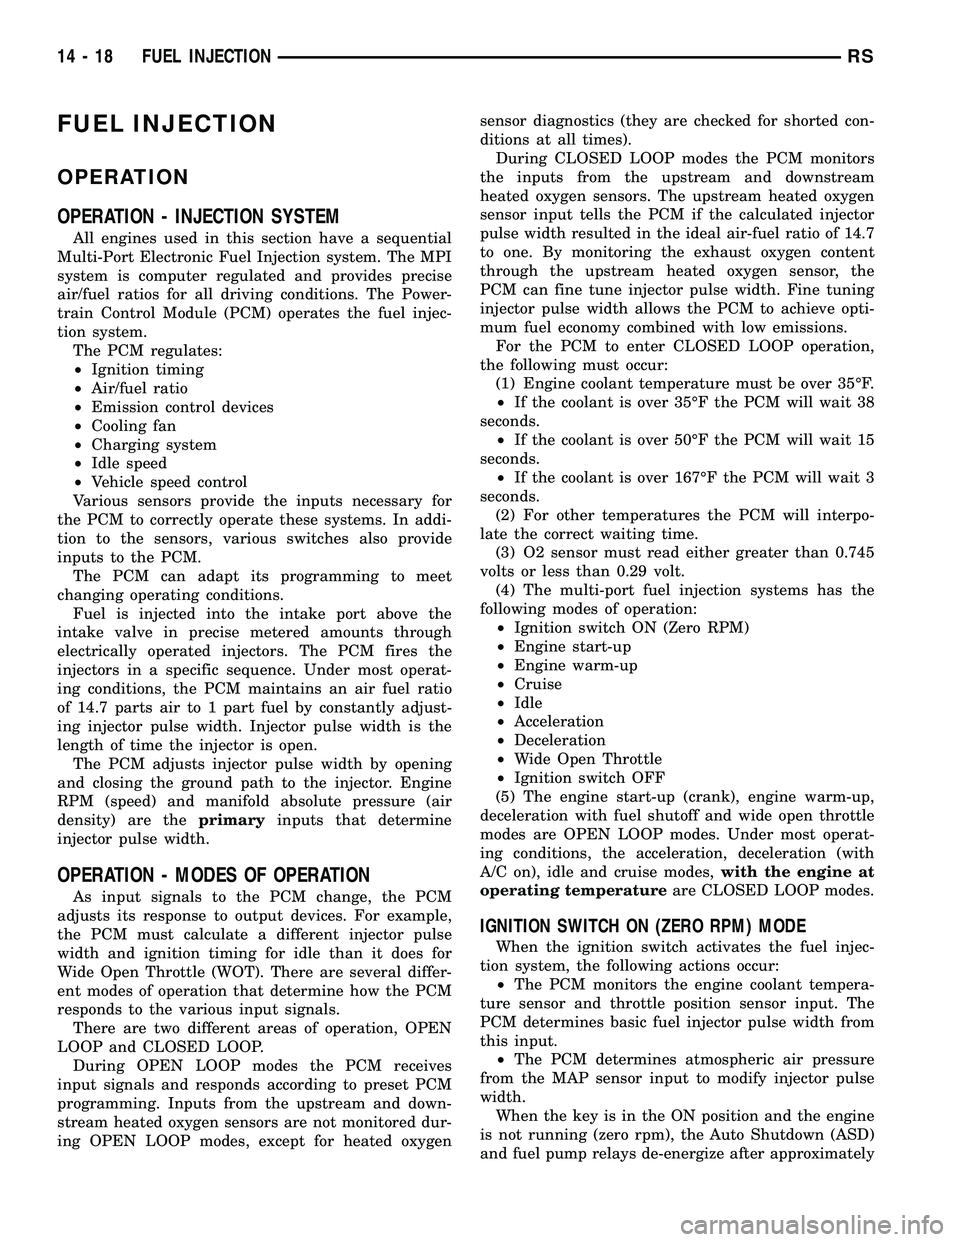 CHRYSLER VOYAGER 2004  Service Manual FUEL INJECTION
OPERATION
OPERATION - INJECTION SYSTEM
All engines used in this section have a sequential
Multi-Port Electronic Fuel Injection system. The MPI
system is computer regulated and provides 